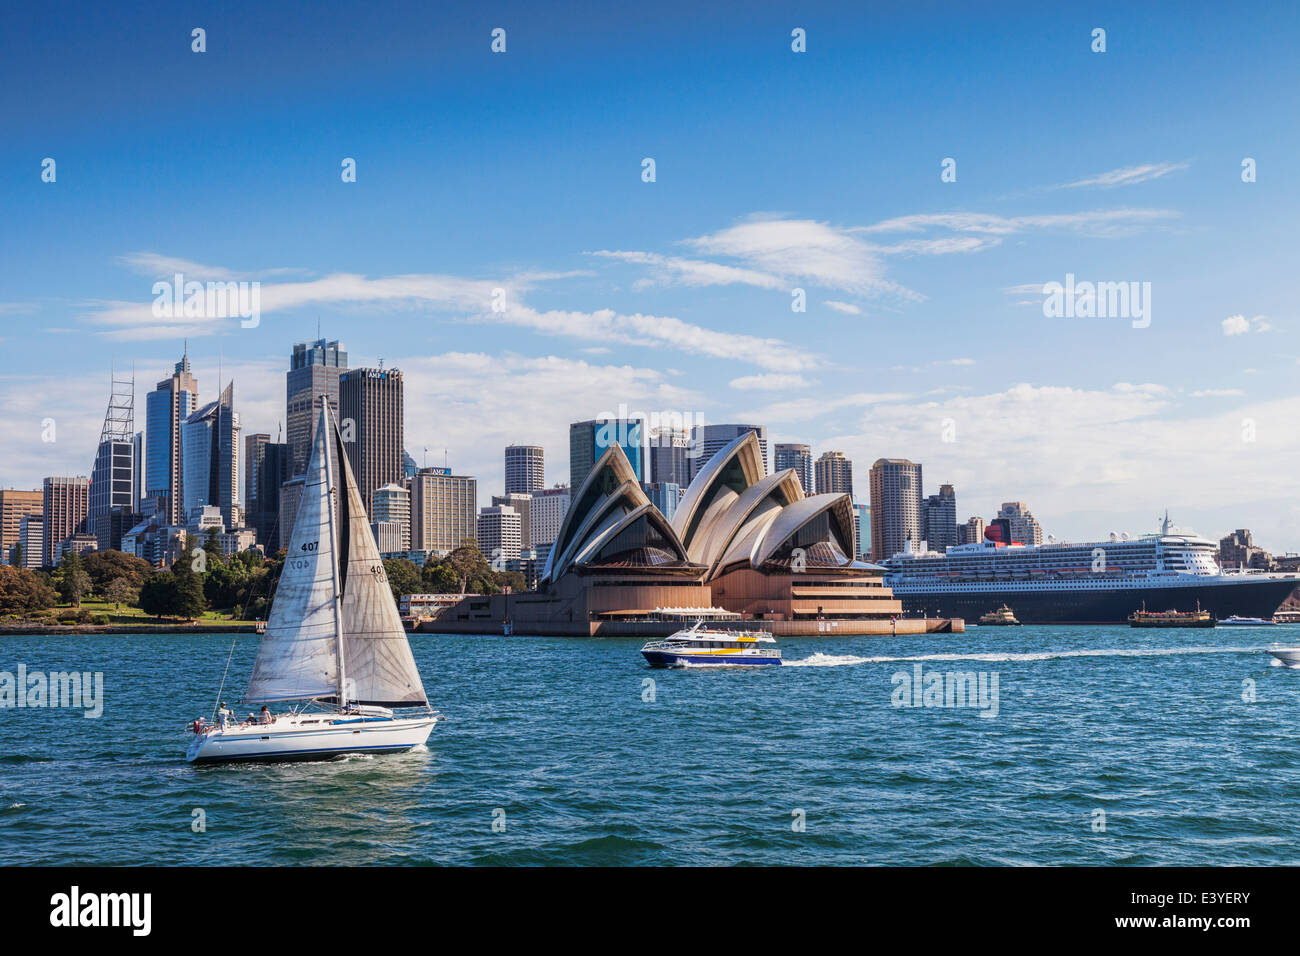 Sydney Harbour, Australia, with Sydney Opera House, a sailing boat, the CBD and Queen Mary 2 moored in Circular Quay. Stock Photo